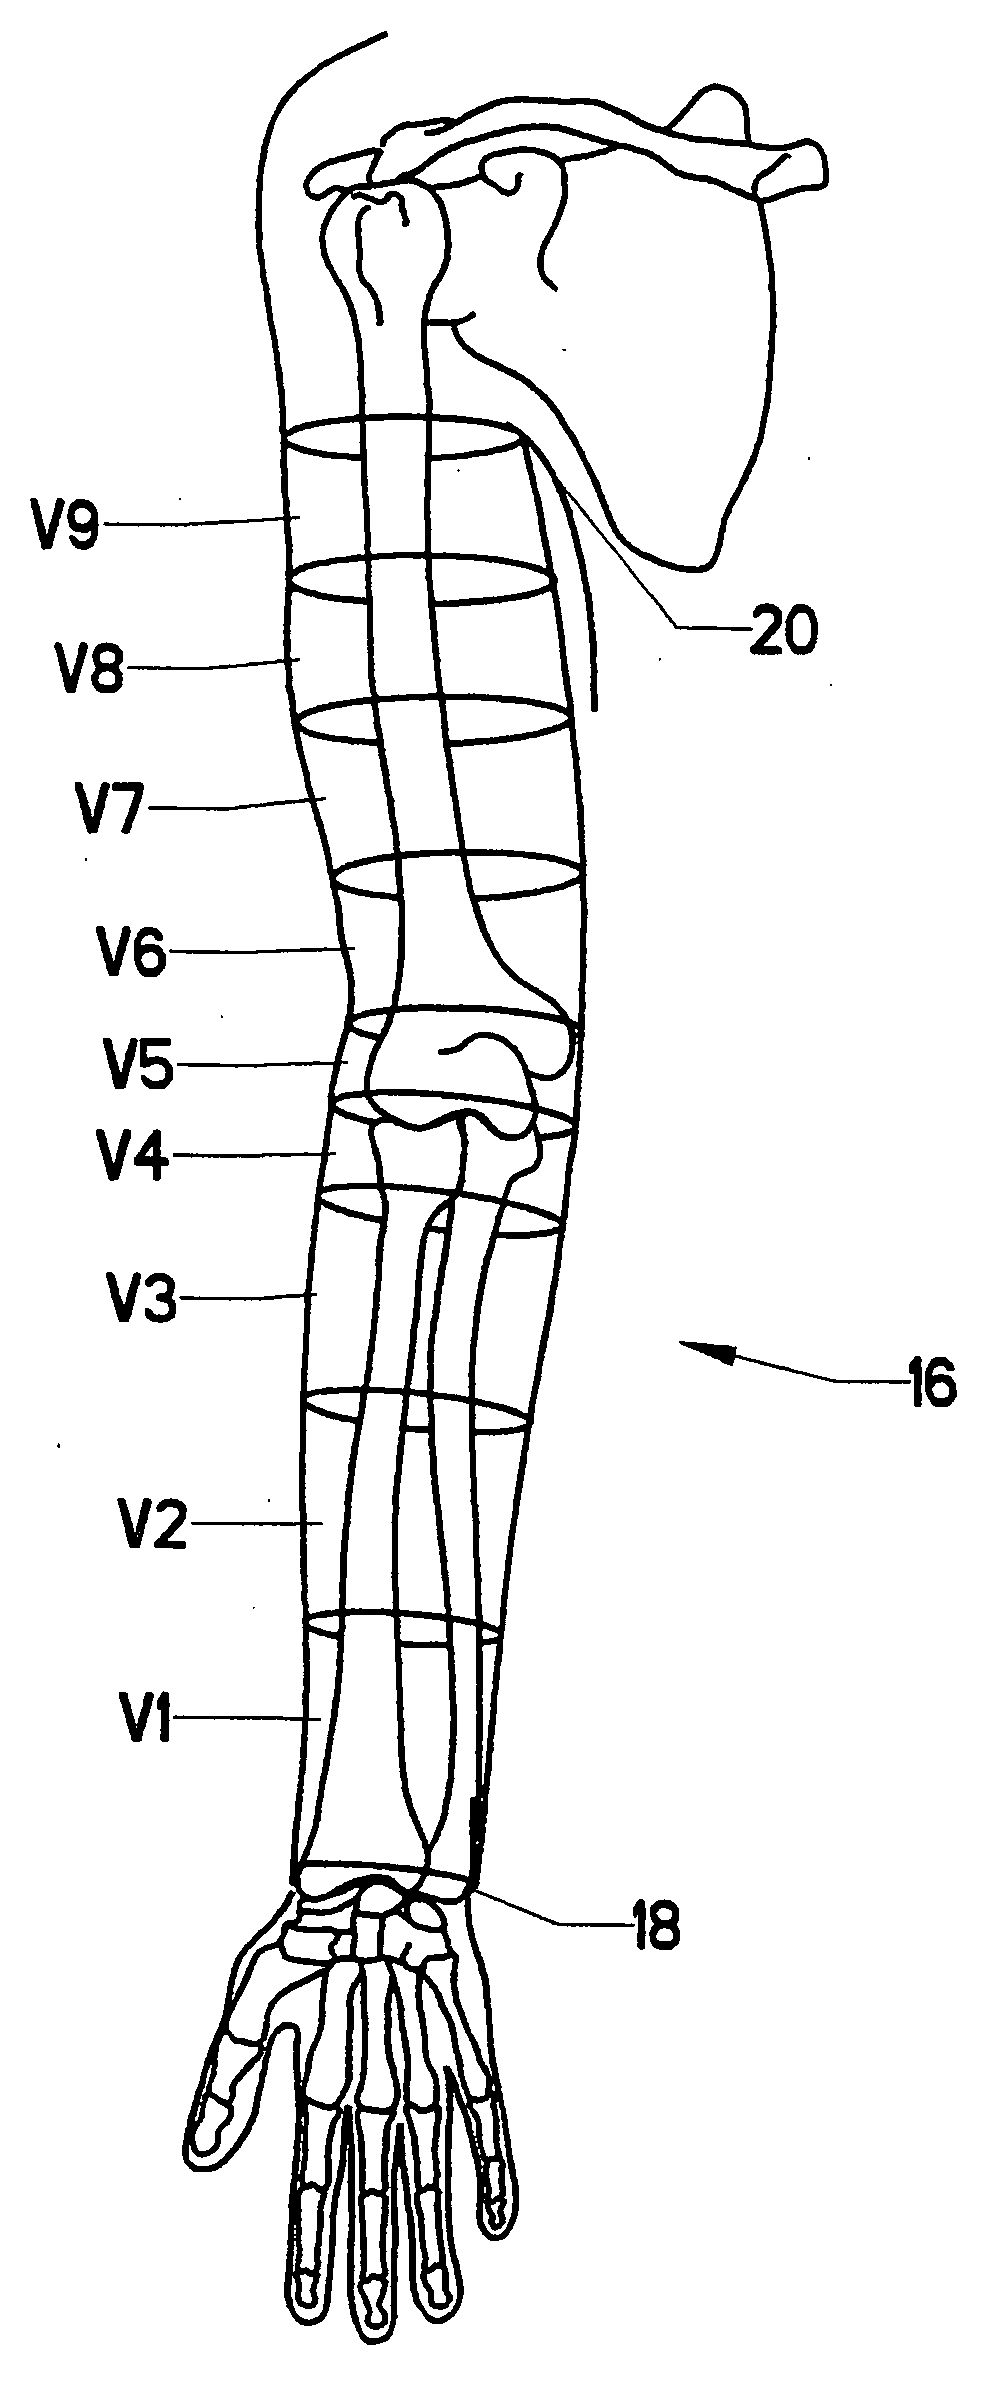 Method for physiological volume measurement and analysis for body volume visualization